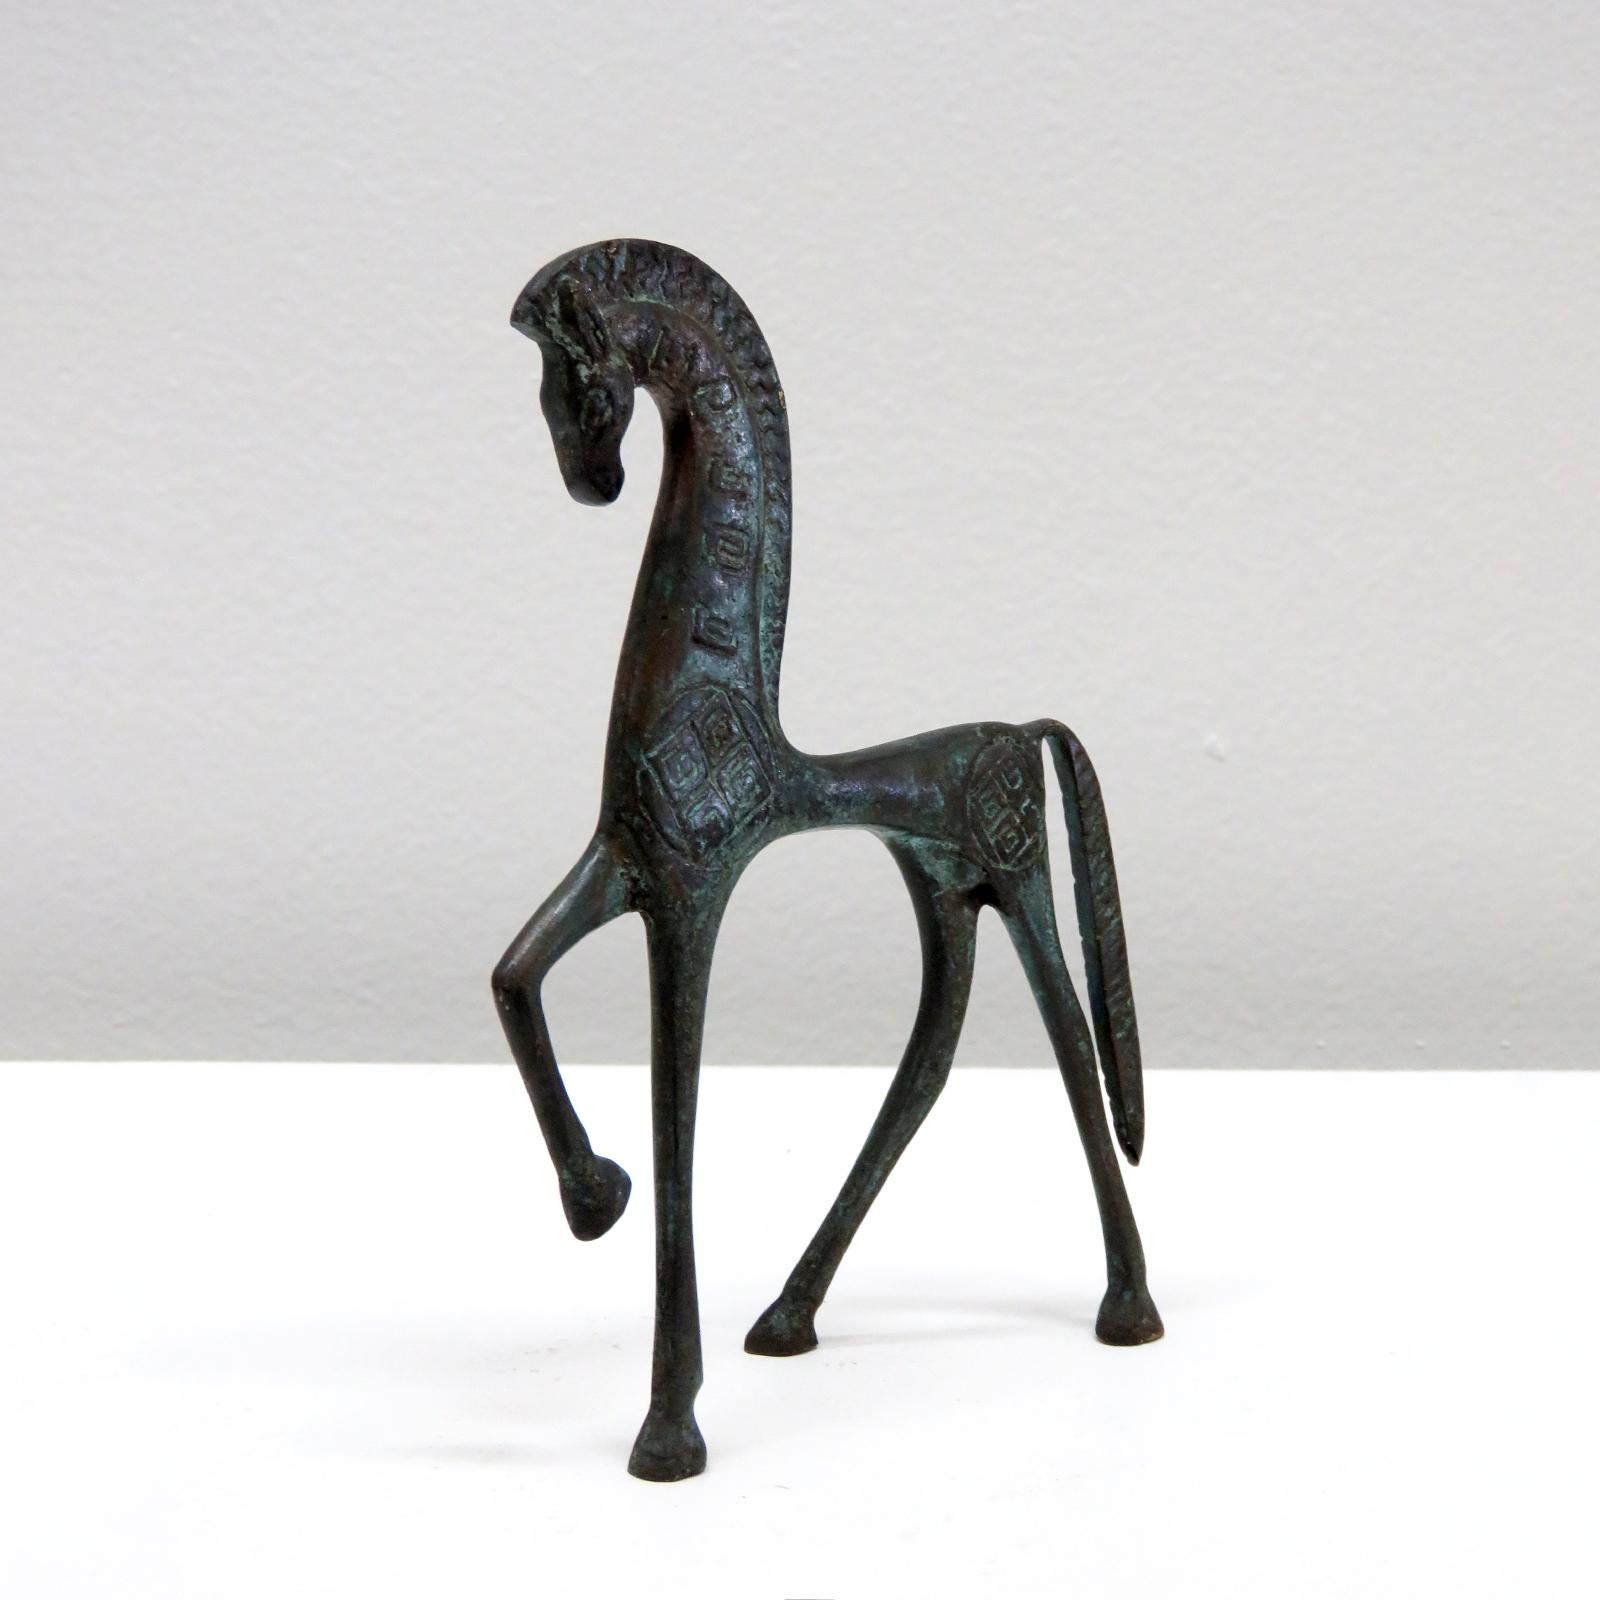 wonderful small scale Etruscan horse bronze sculpture in the style of Frederick Weinberg, circa 1960s. Minimalist and modern, with stunning detailed etchings along the horses body.